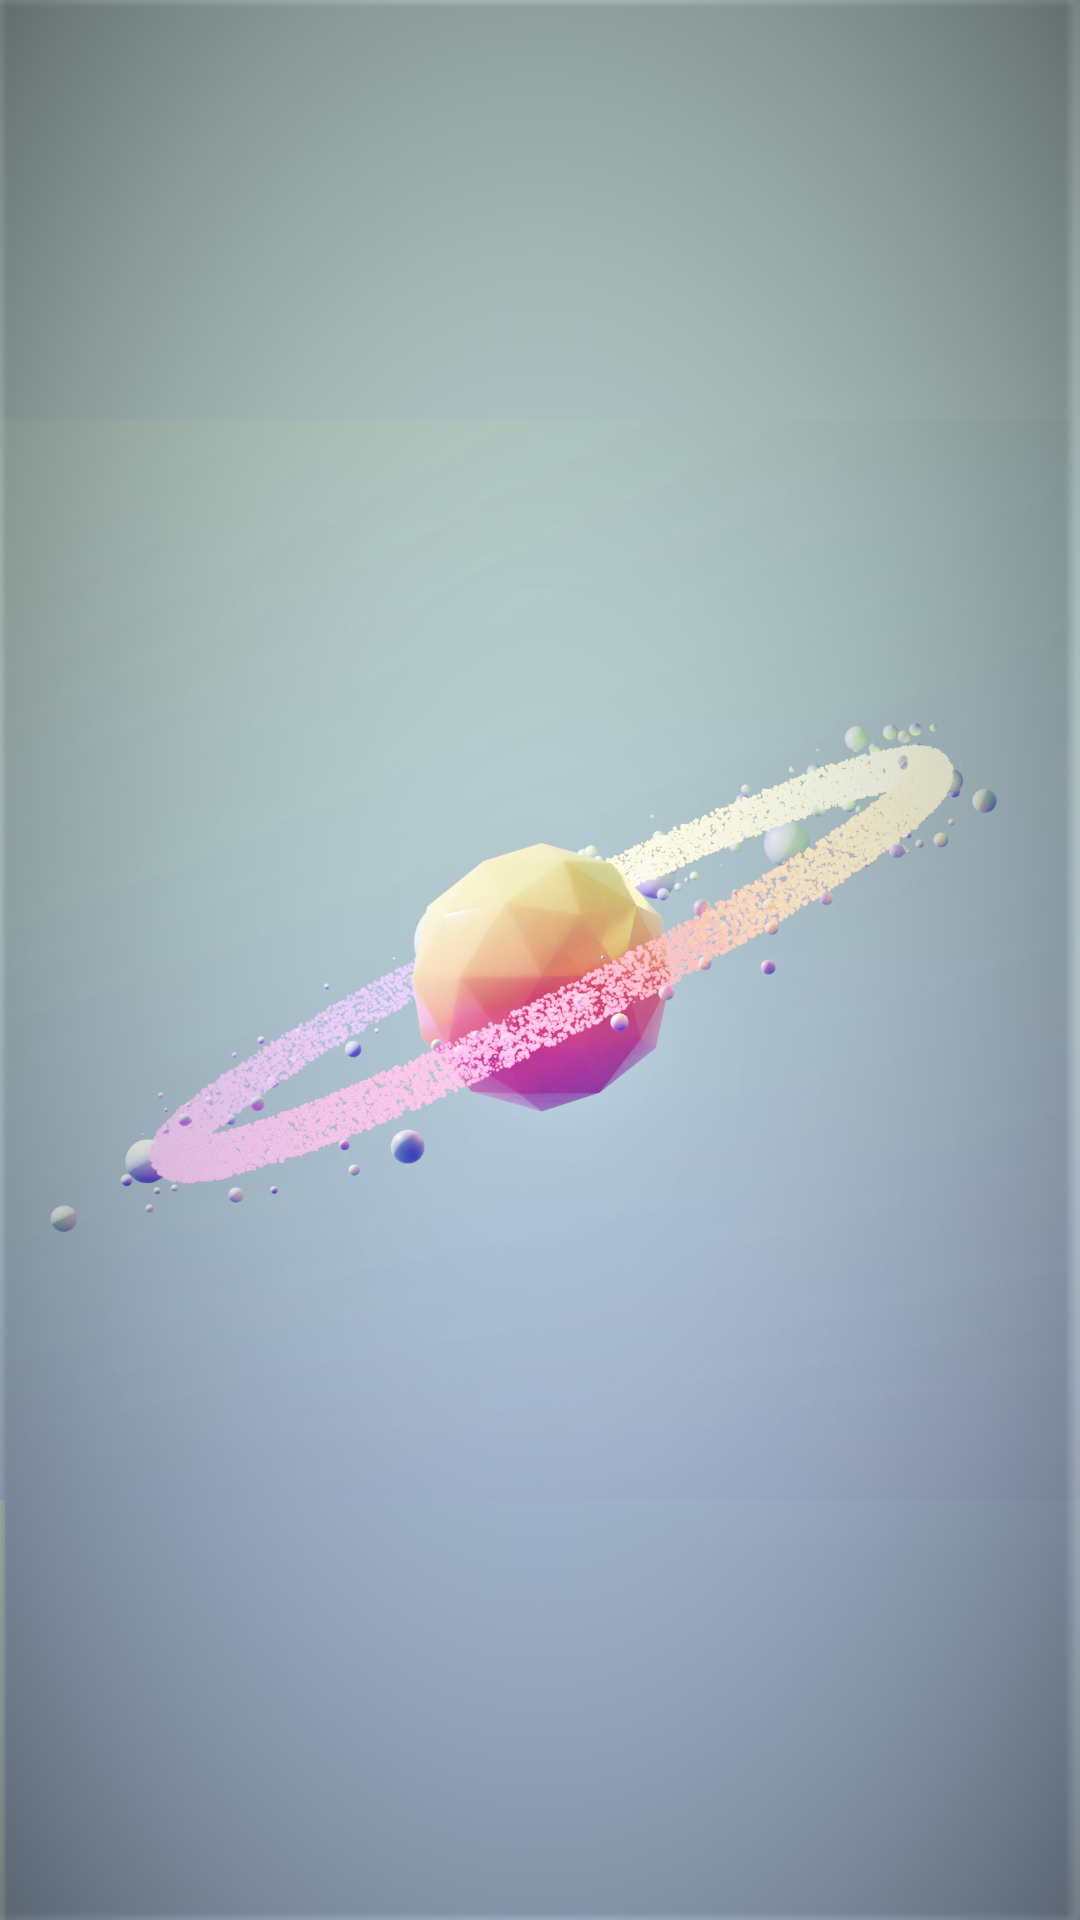 Minimalism 3D Abstract Planet Digital Art Planetary Rings Space Art Simple Background 1080x1920